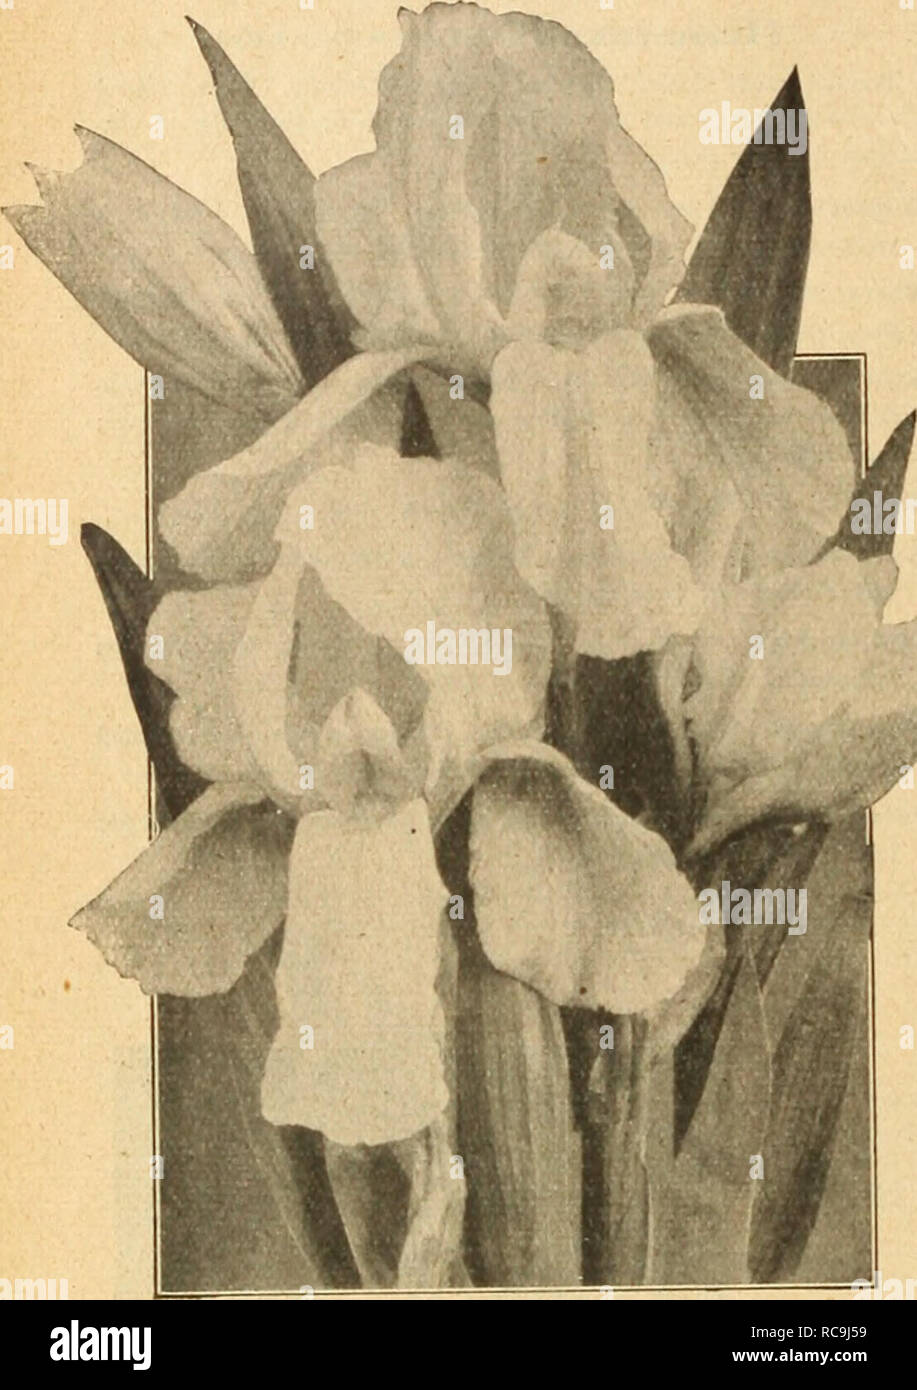 . Dreer's autumn catalogue 1926. Bulbs (Plants) Catalogs; Flowers Seeds Catalogs; Gardening Equipment and supplies Catalogs; Nurseries (Horticulture) Catalogs; Vegetables Seeds Catalogs. 22 /flEHlSyA-DlM BULB5 &quot;^&quot;^mLL PLANTM MfflEUHnilll. Golden Yellow German Iris Siierwin-Wricht (Offered on paqe 21) Ten Choice New Iris Germanica Ambassadeur. One of the finest. The stout stems bear flowers of largest size, magnificent lorm and unique coloring. Standards deep lavender suffused with bronze, falls maroon with purplish cast. Archeveque. Standards a rich shade of reddish purple, falls dar Stock Photo